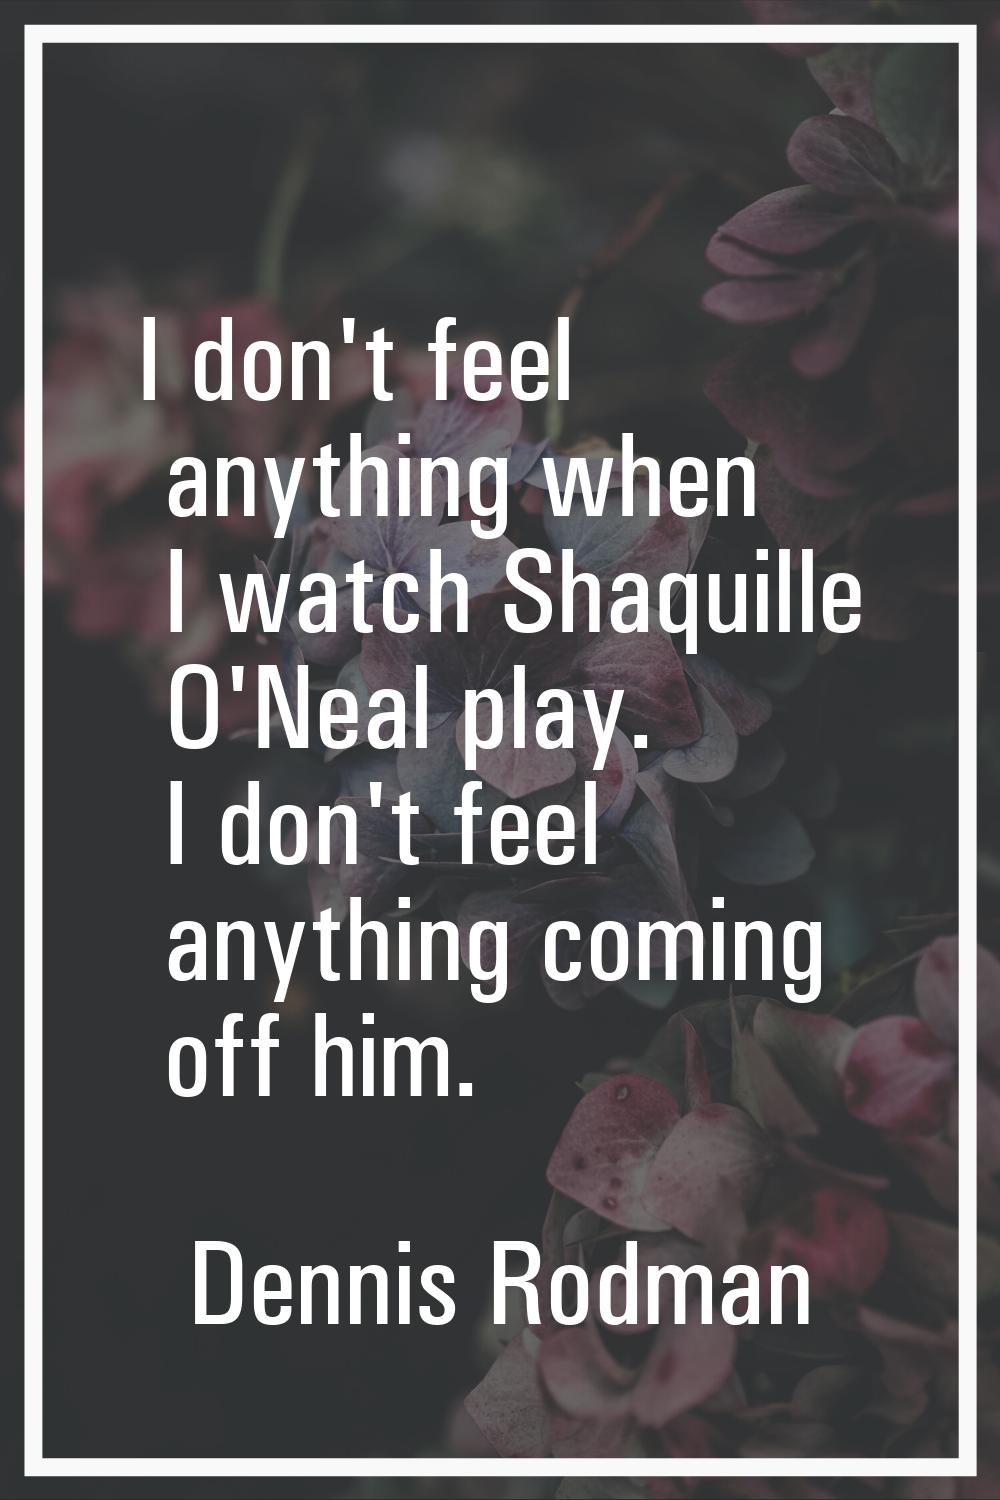 I don't feel anything when I watch Shaquille O'Neal play. I don't feel anything coming off him.